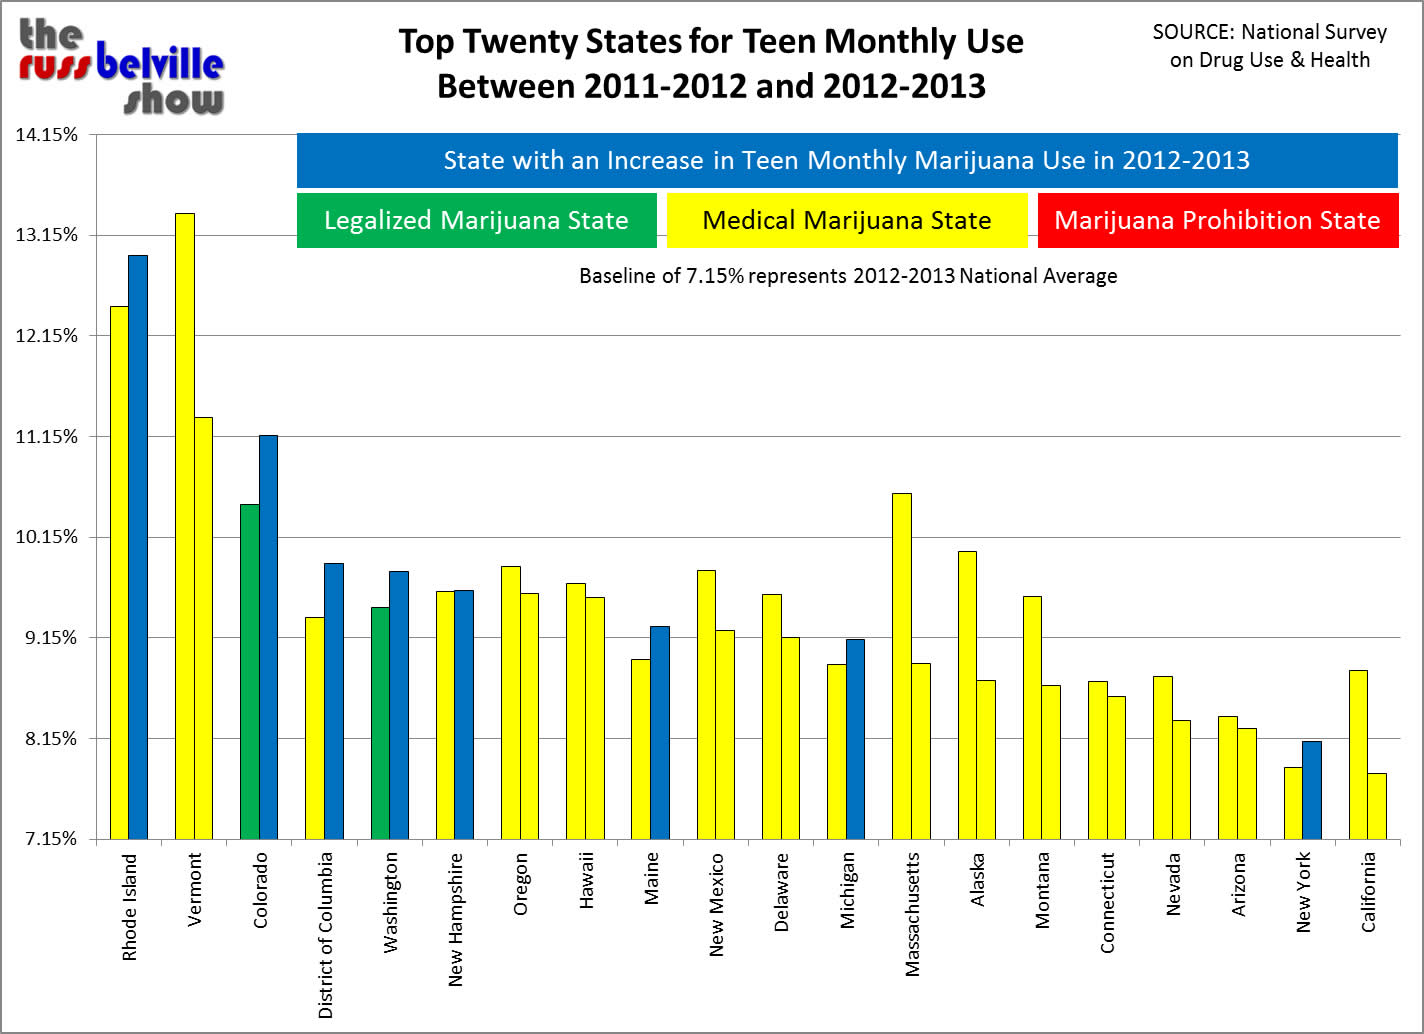 NSDUH 2012-2013 Top 20 Teen Monthly Use